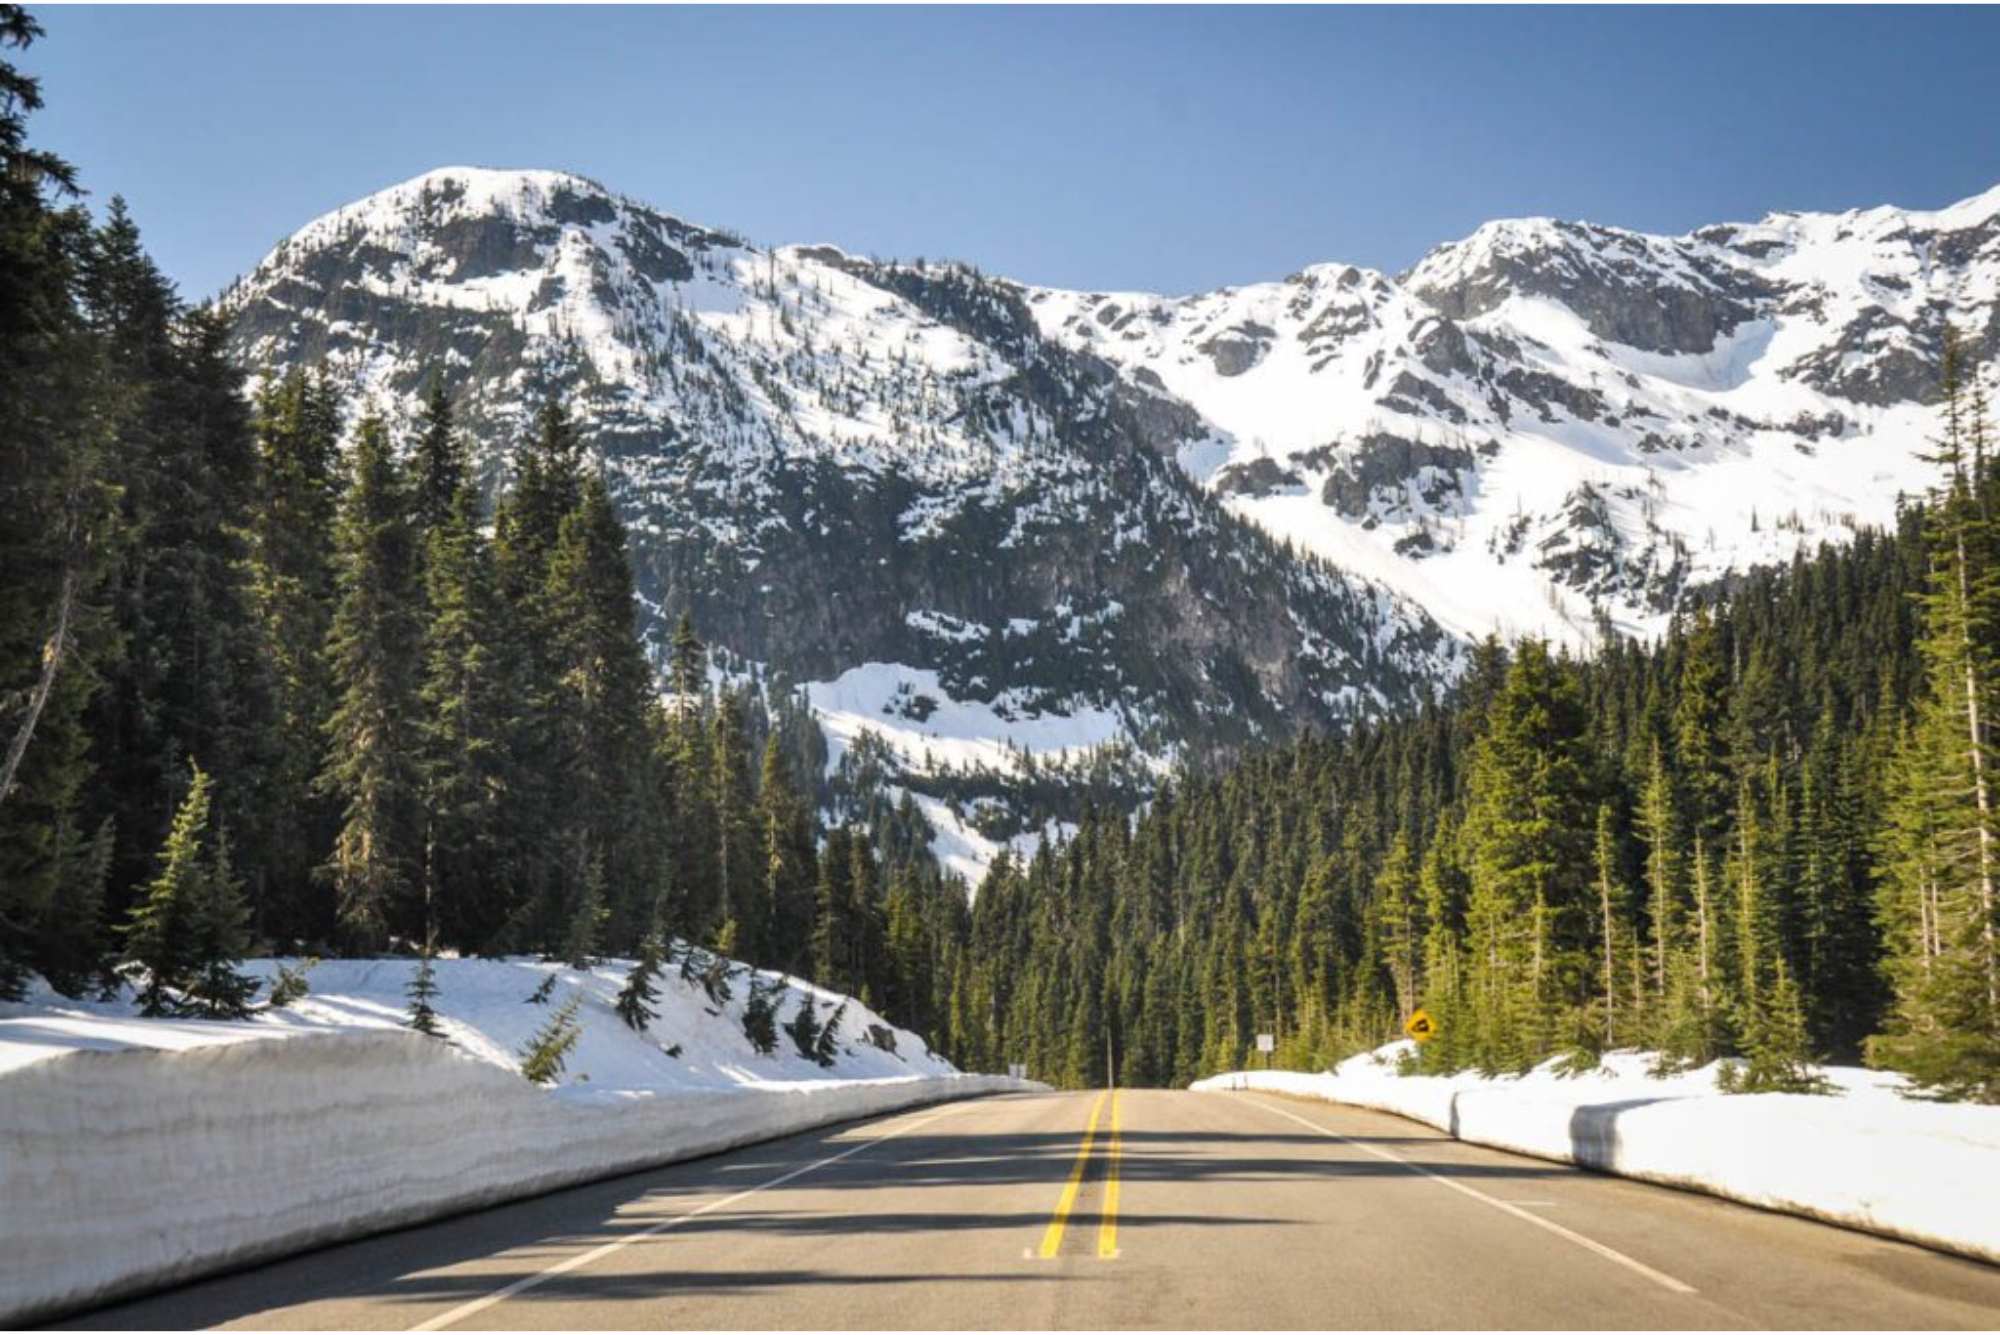 Best Things to Do in North Cascades National Park